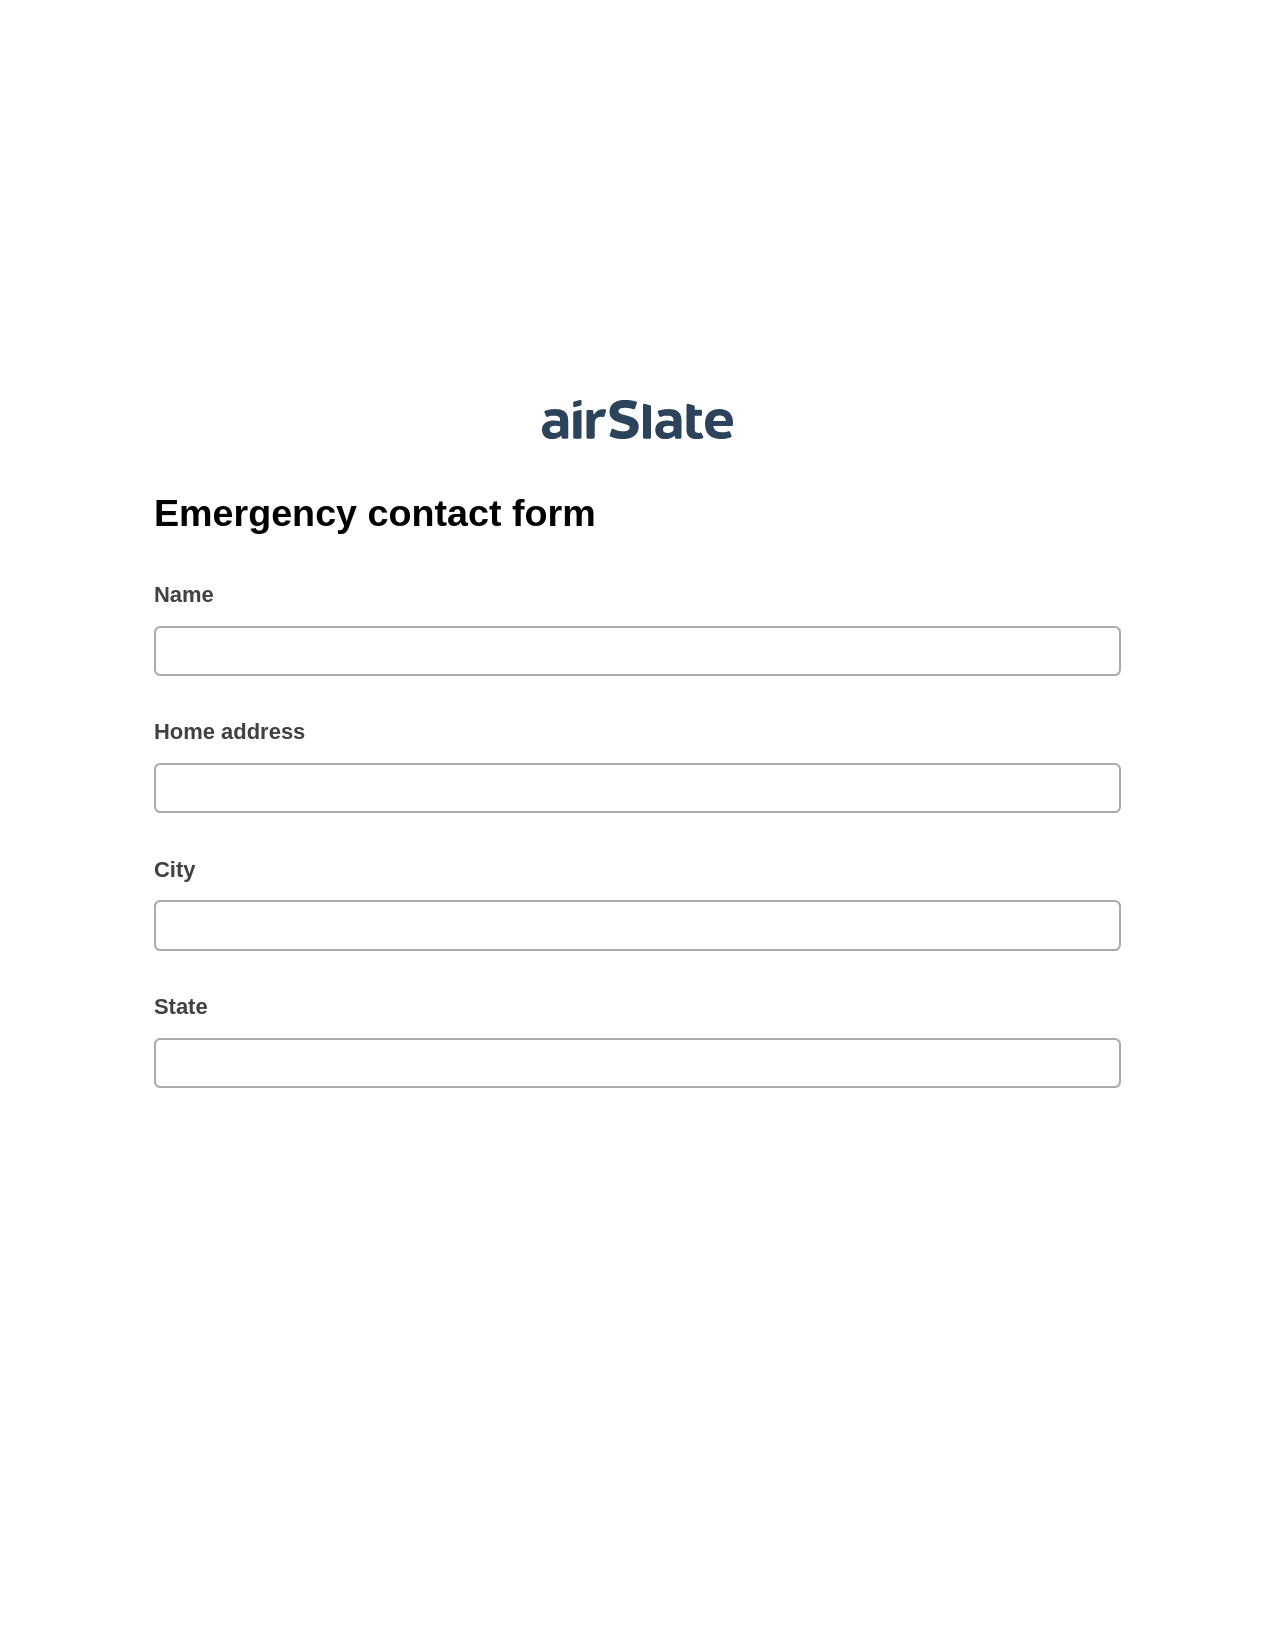 Multirole Emergency contact form Pre-fill Dropdown from Airtable, Invoke Salesforce Process Bot, Slack Notification Postfinish Bot